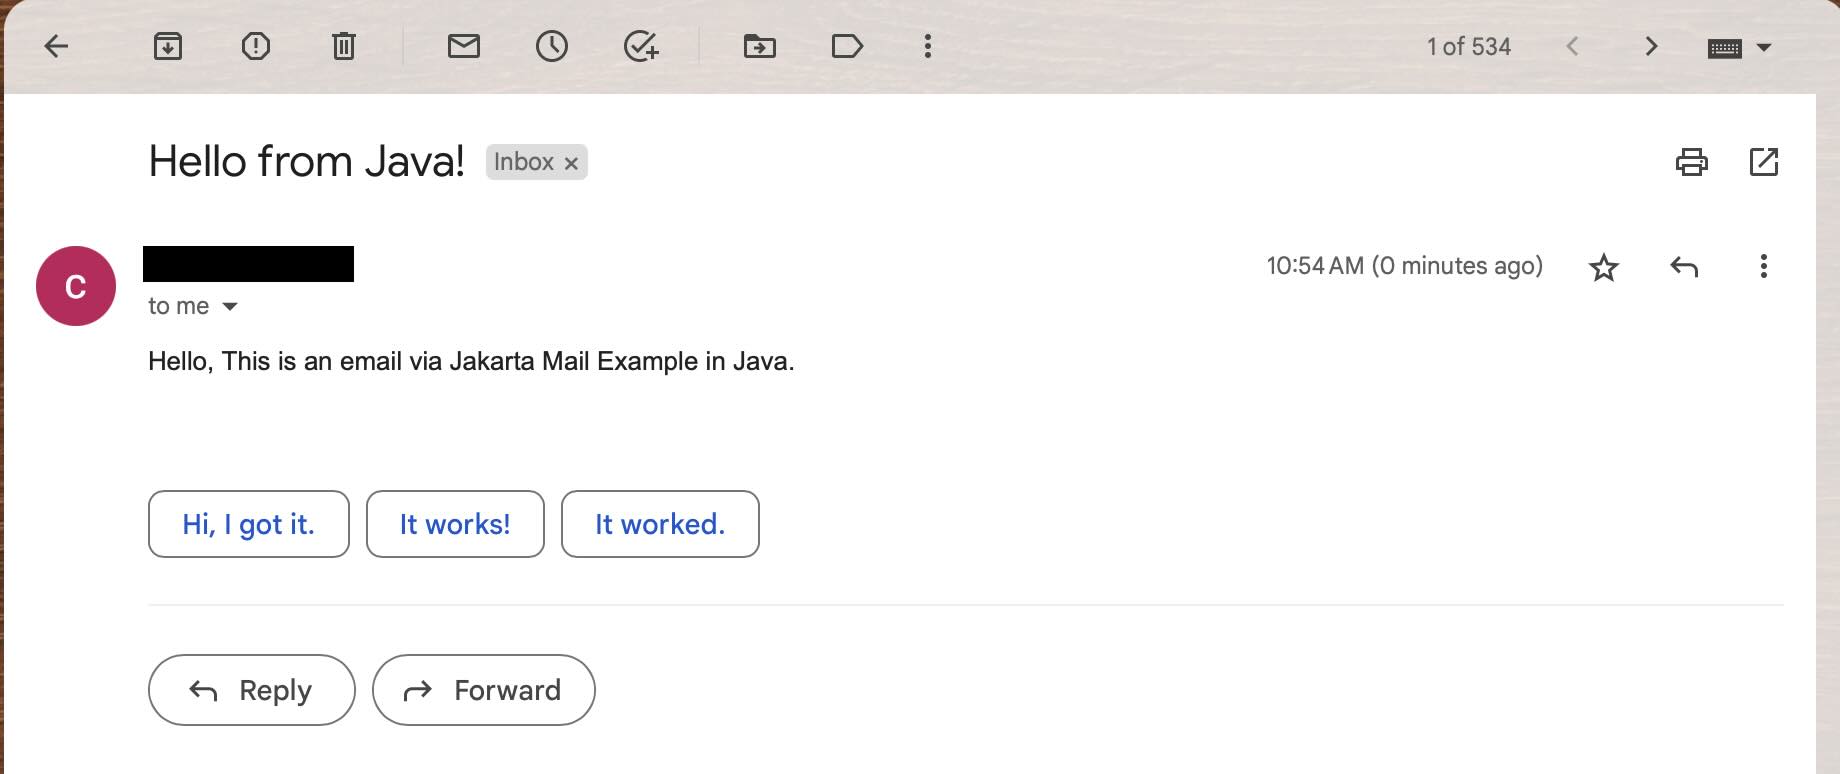 Email as received using Java Code